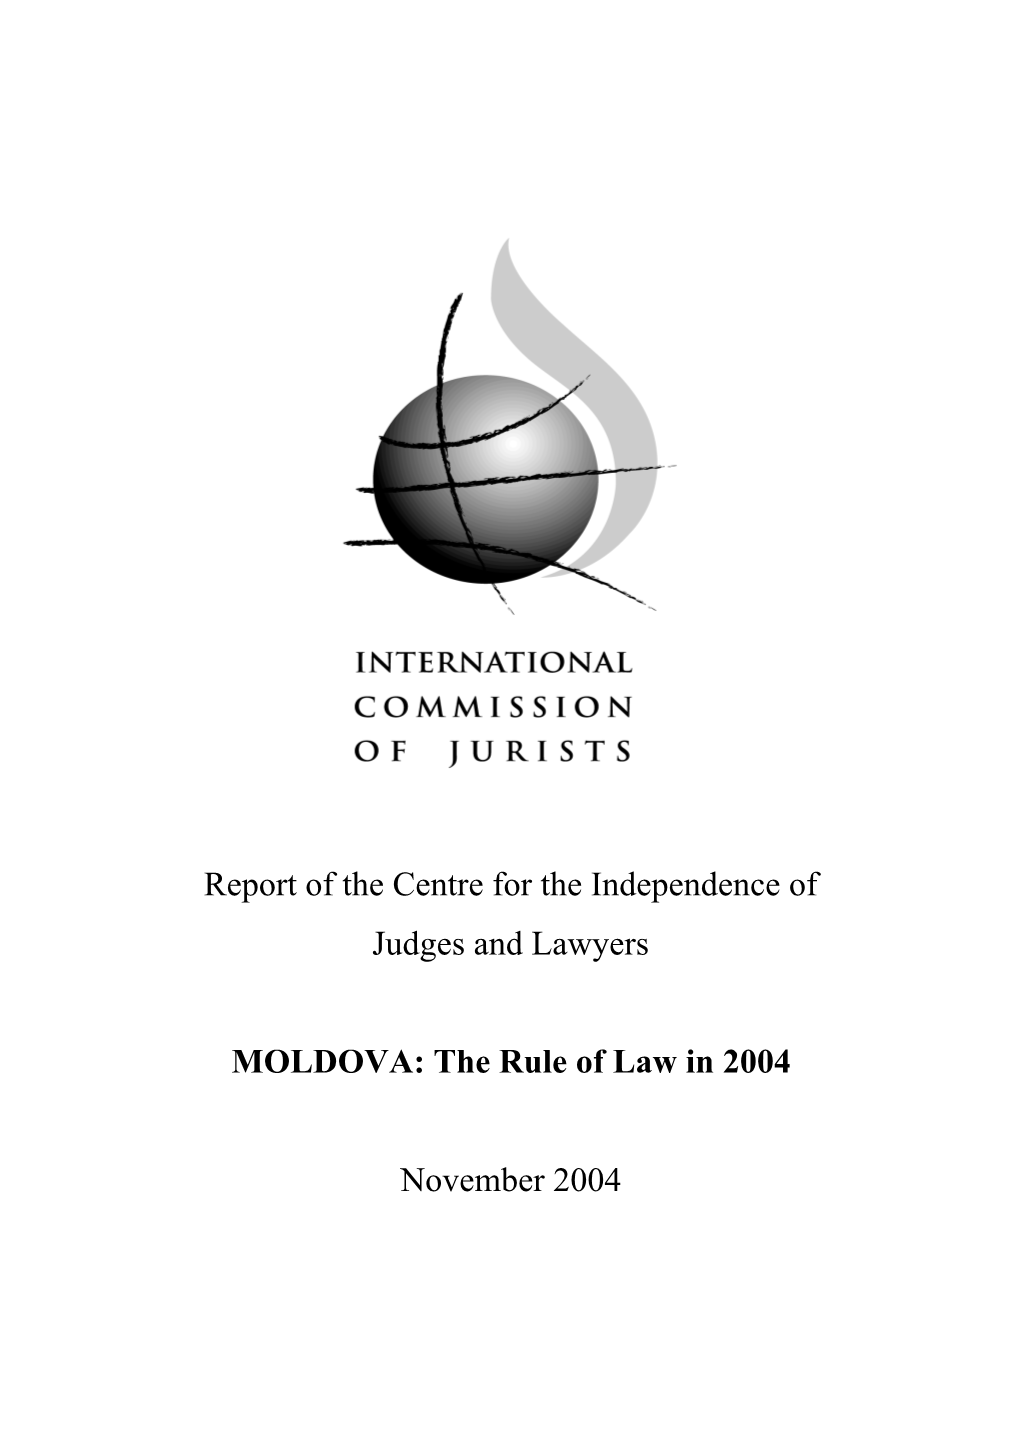 Report of the Centre for the Independence of Judges and Lawyers